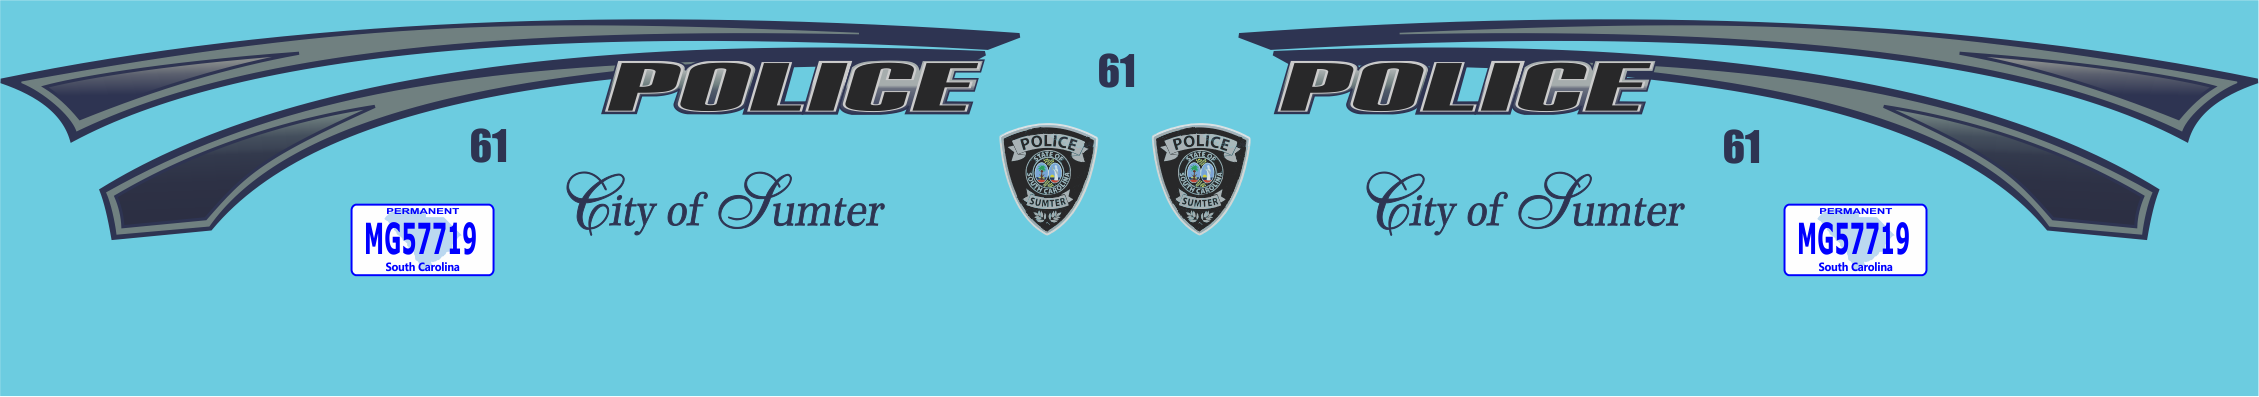 1/24-1/25 Sumter, South Carolina Police Department waterslide decals